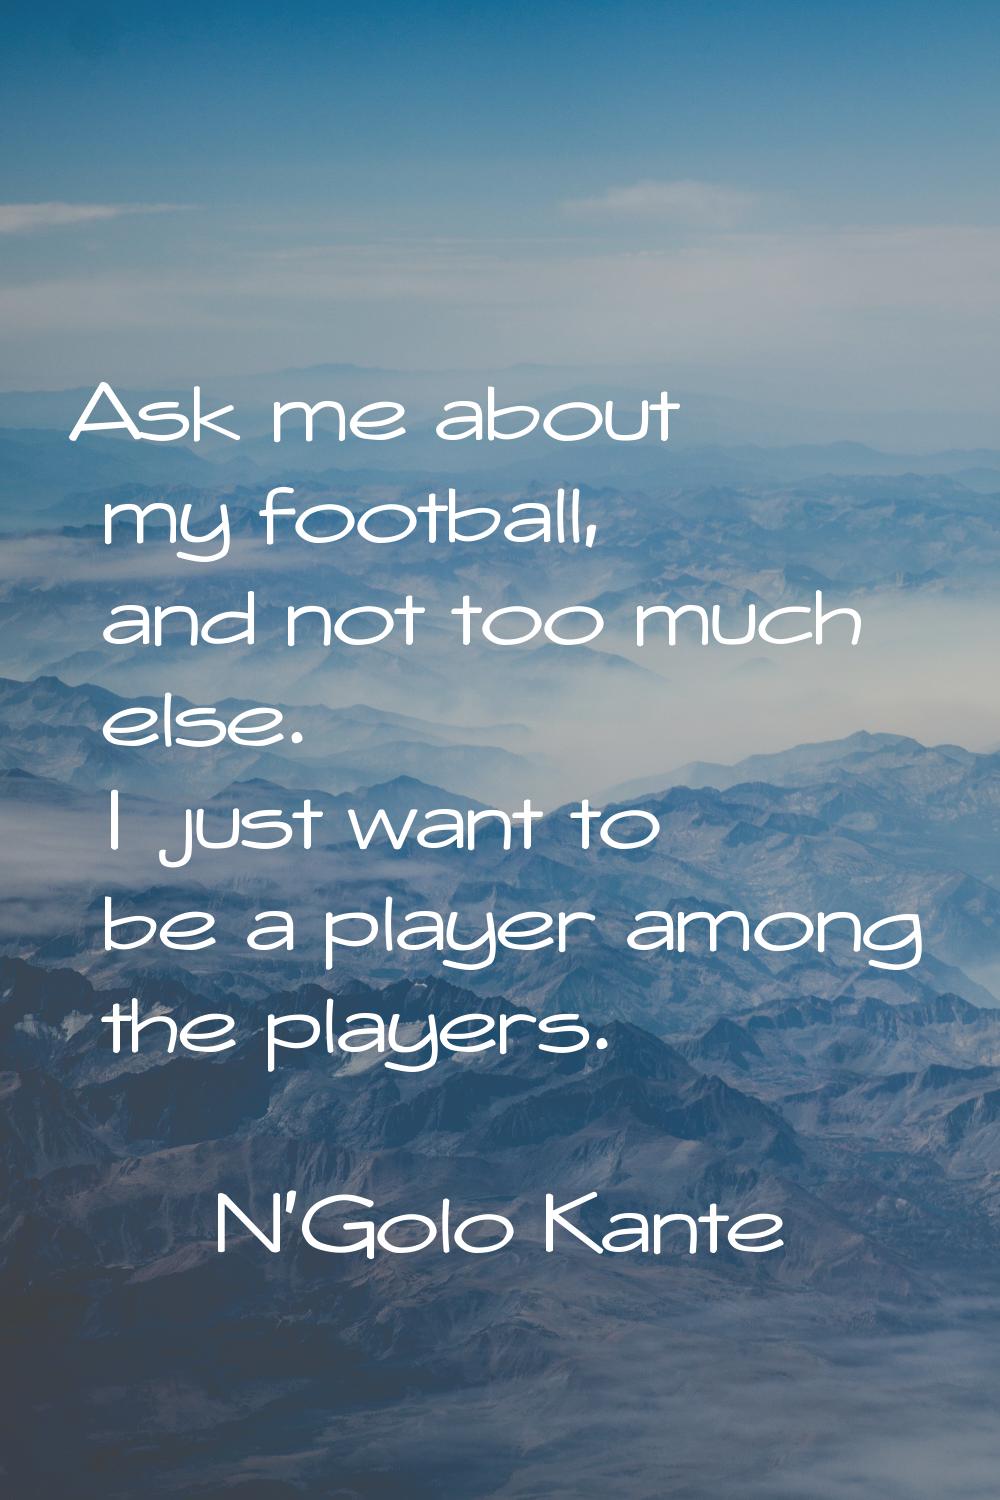 Ask me about my football, and not too much else. I just want to be a player among the players.